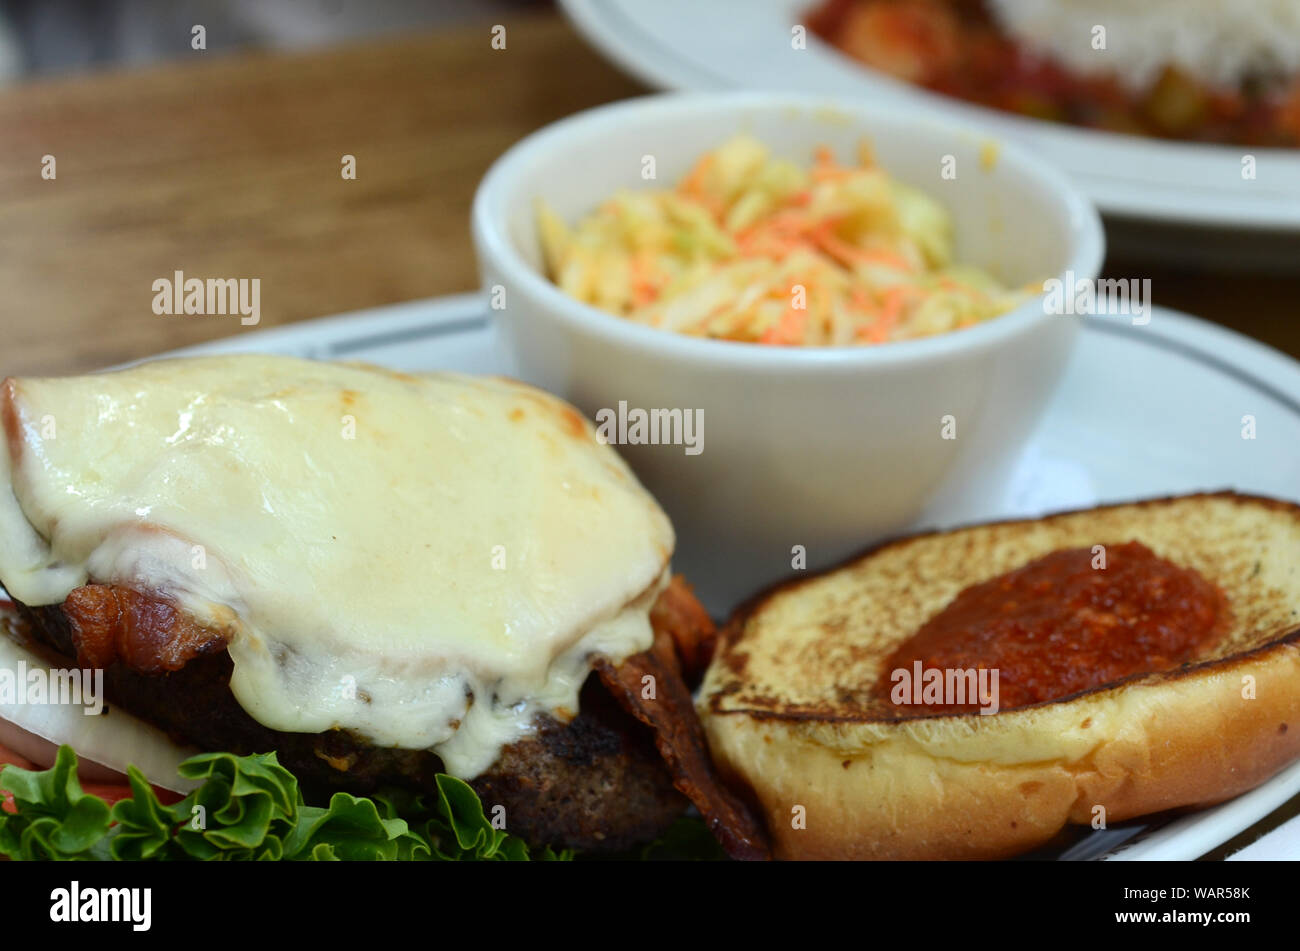 KING BEEF: A gourmet bacon cheeseburger with a rare horse radish spread is served up for a lunch meal at a restaurant in a Savannah, Georgia. Stock Photo